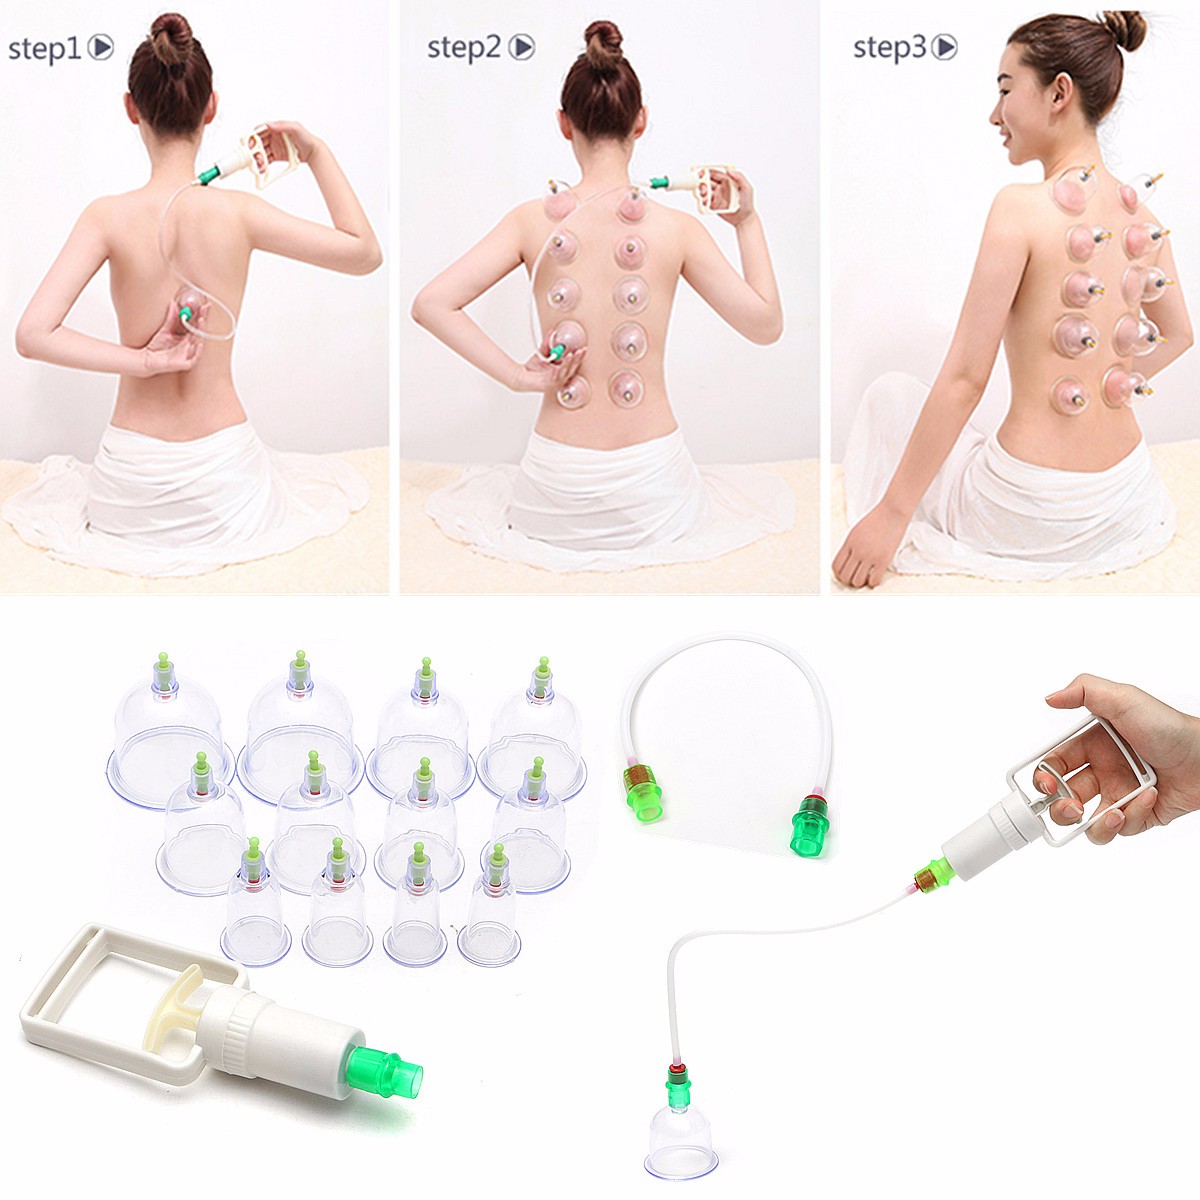 12-Cups-Vacuum-Megnetic-Therapy-Tools-Massage-Acupuncture-Cupping-Kits-Set-1129619